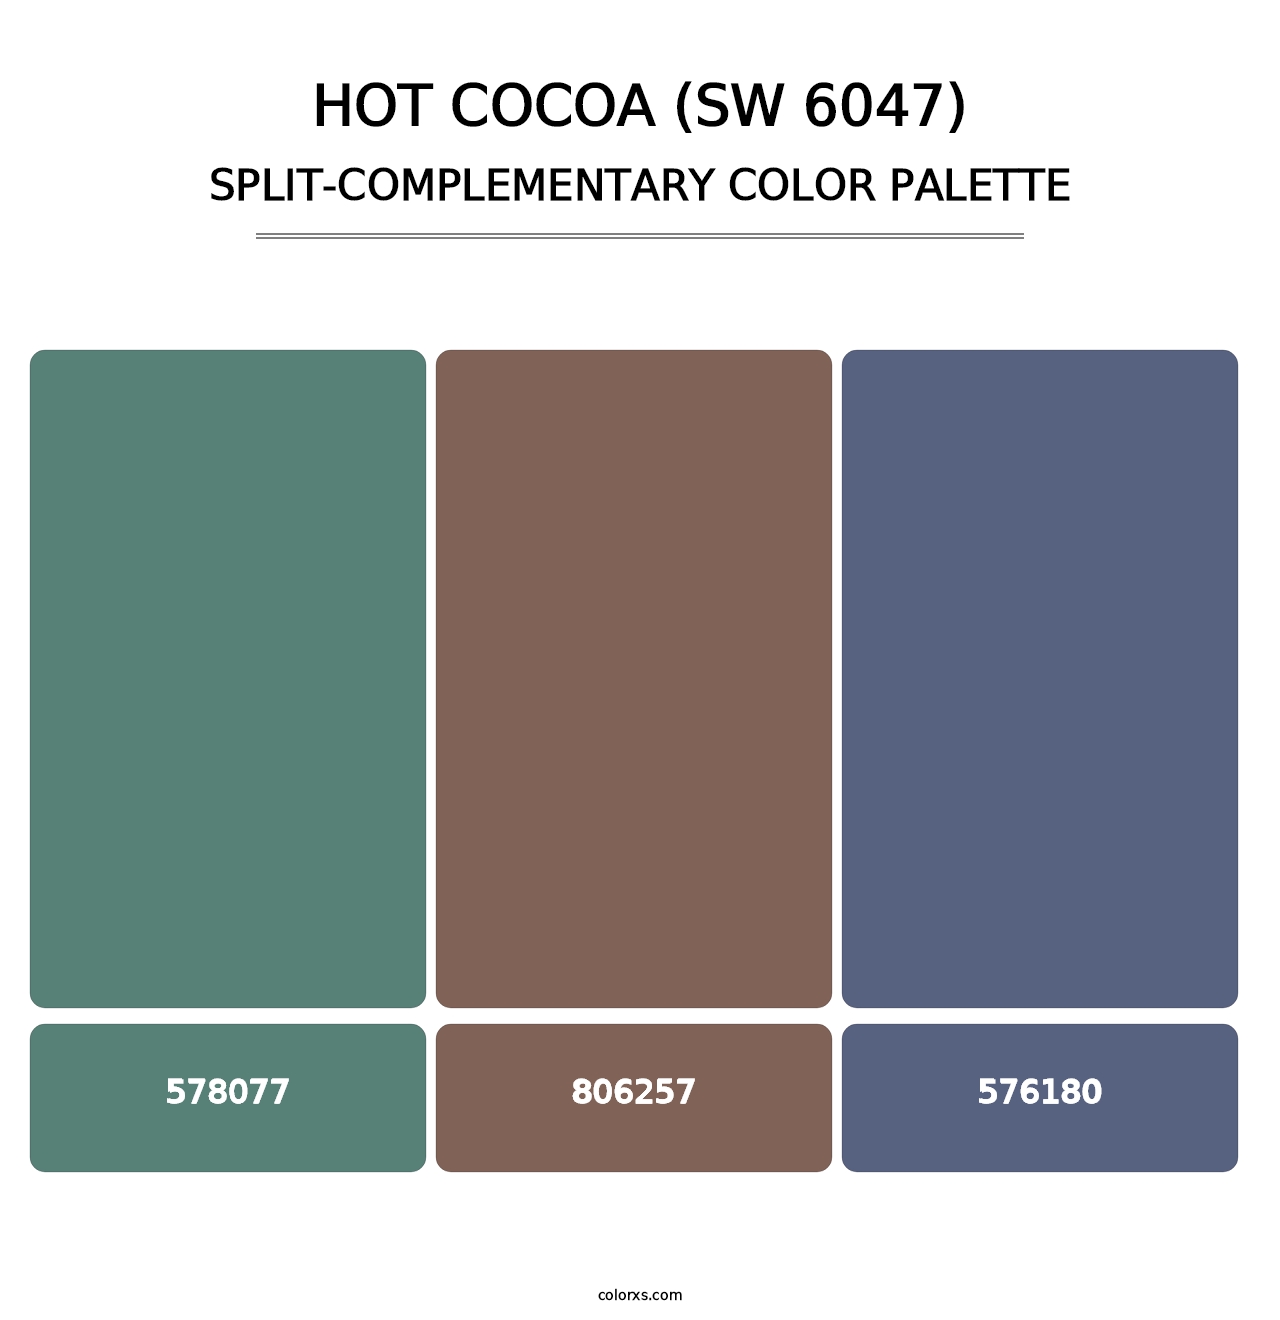 Hot Cocoa (SW 6047) - Split-Complementary Color Palette